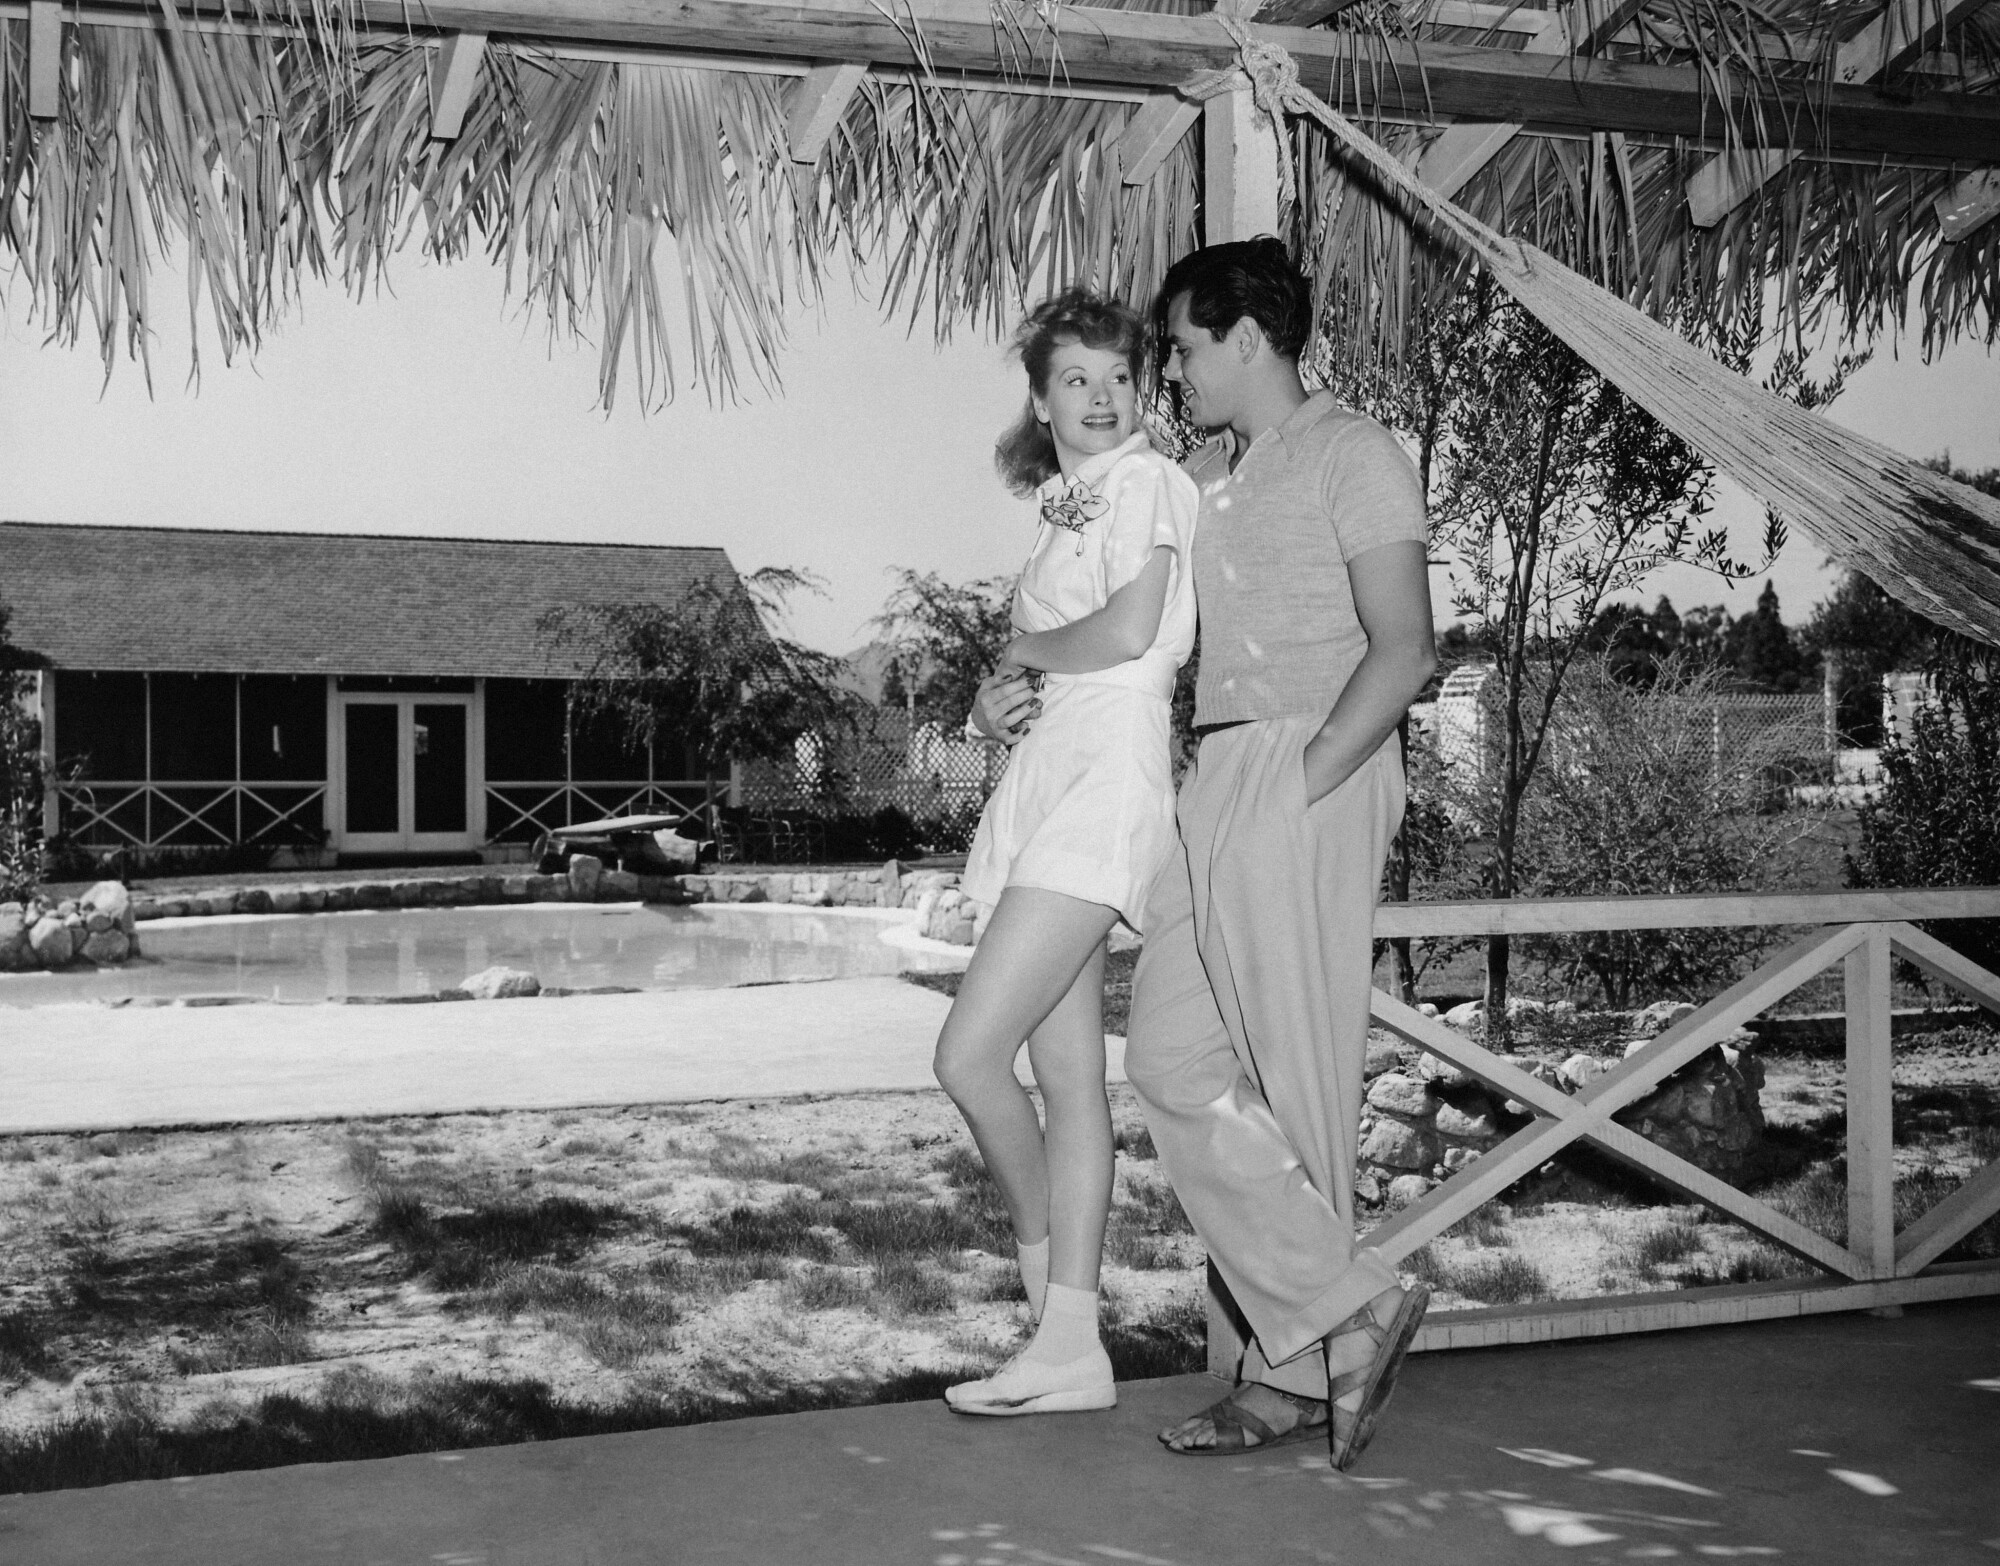 A 1942 photograph of Lucille Ball and Desi Arnaz standing together outside their home.